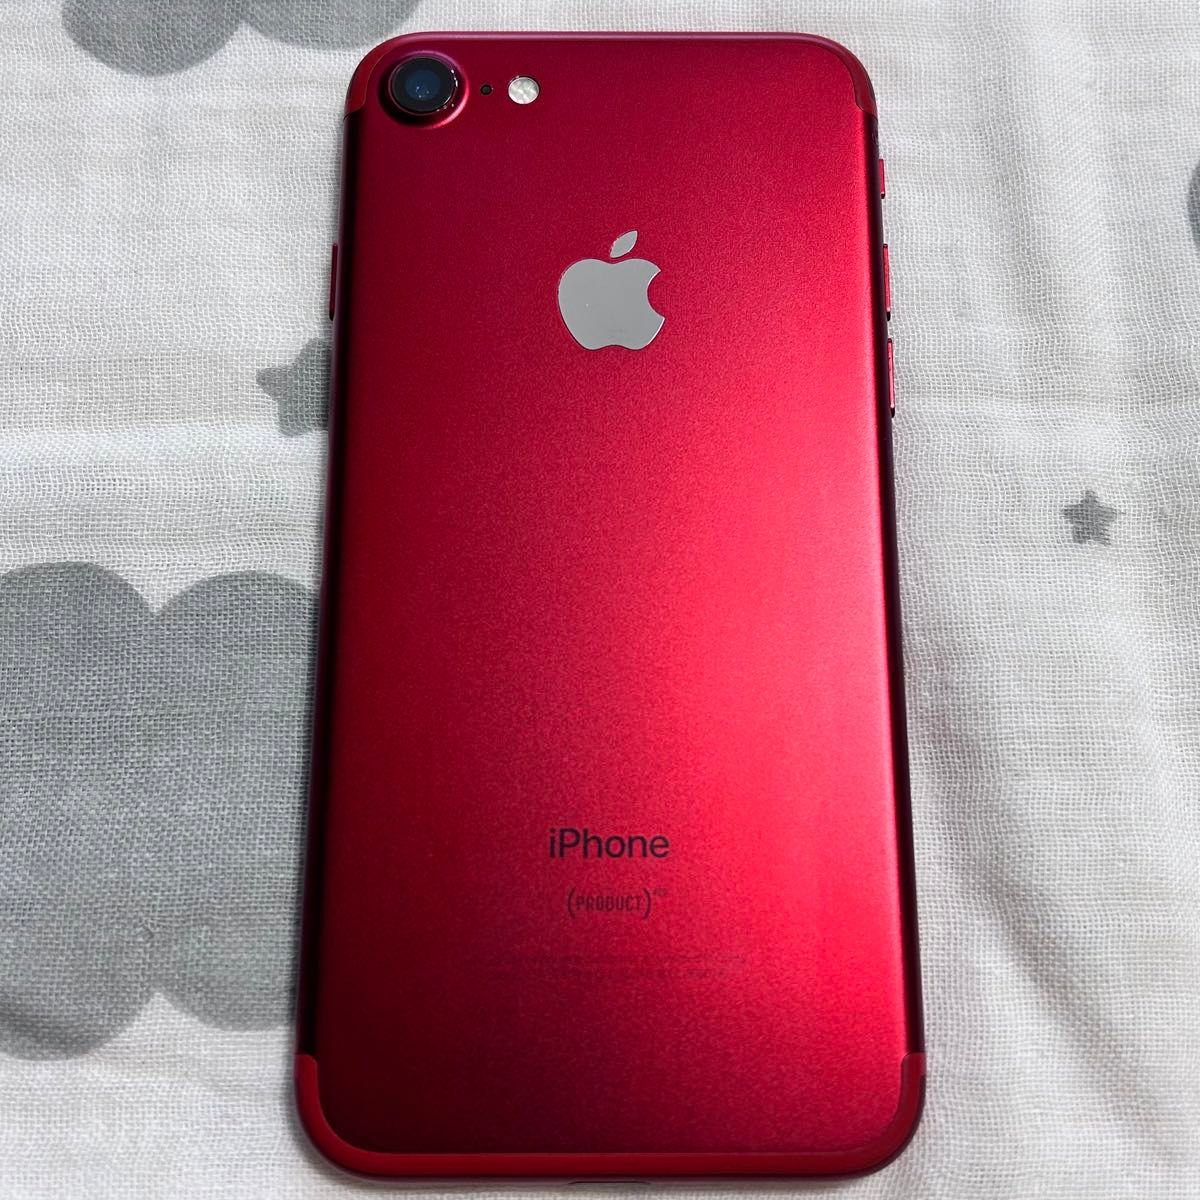 iPhone 7 128GB レッド 本体 のみ ソフトバンク PRODUCT RED 赤 初期化済 アイフォン